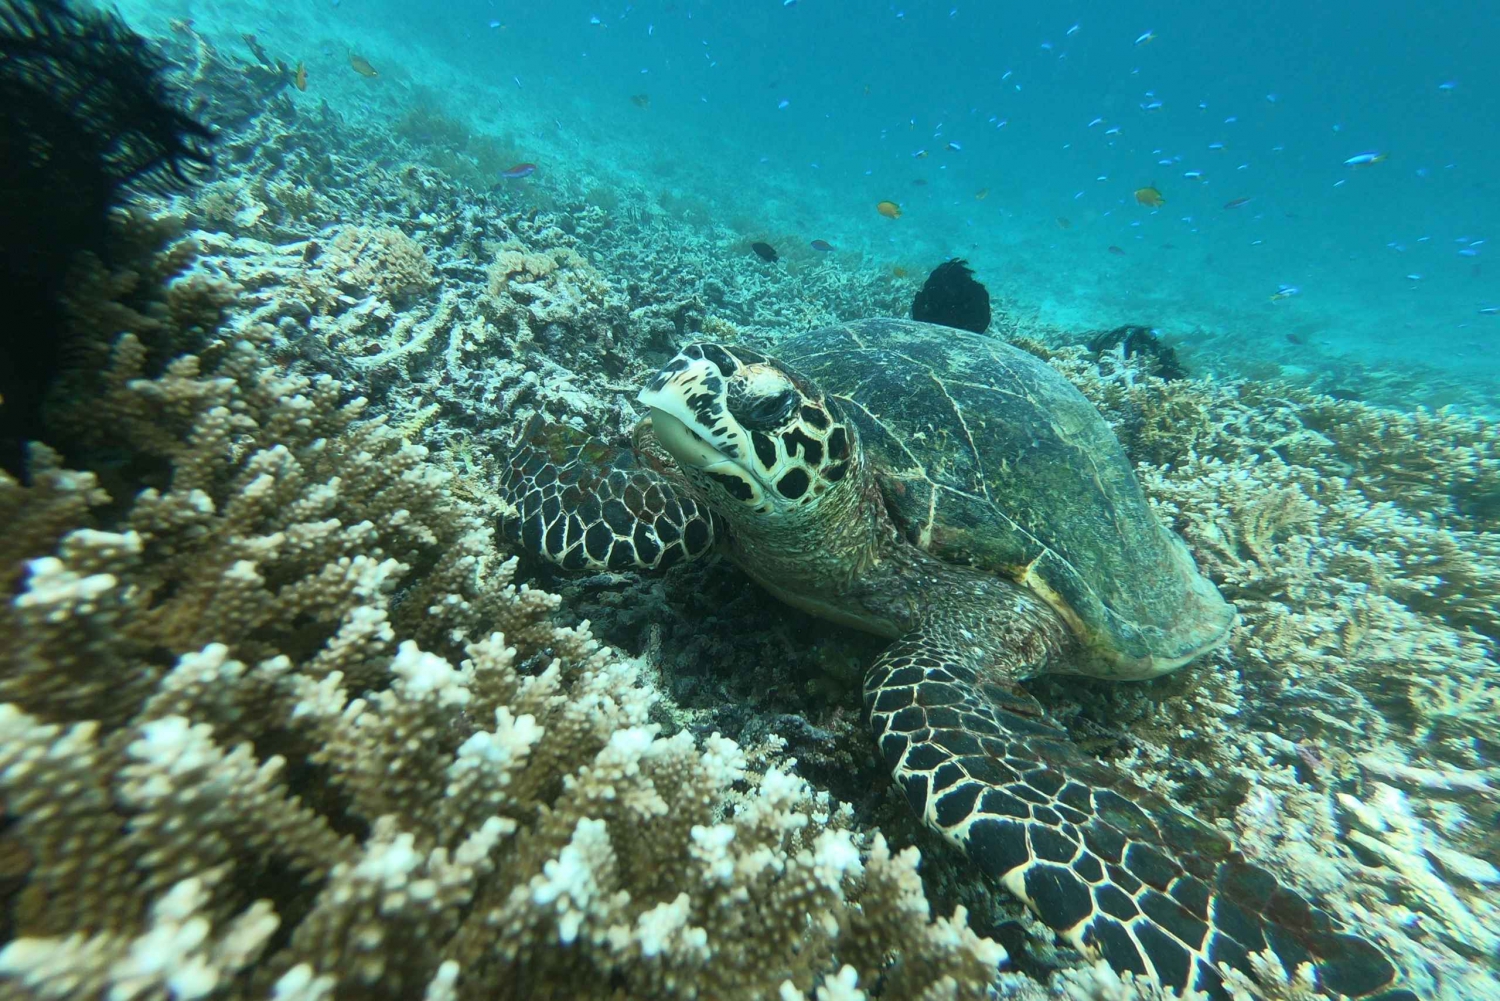 Gili Islands: Half-Day Snorkeling Tour with Pickup